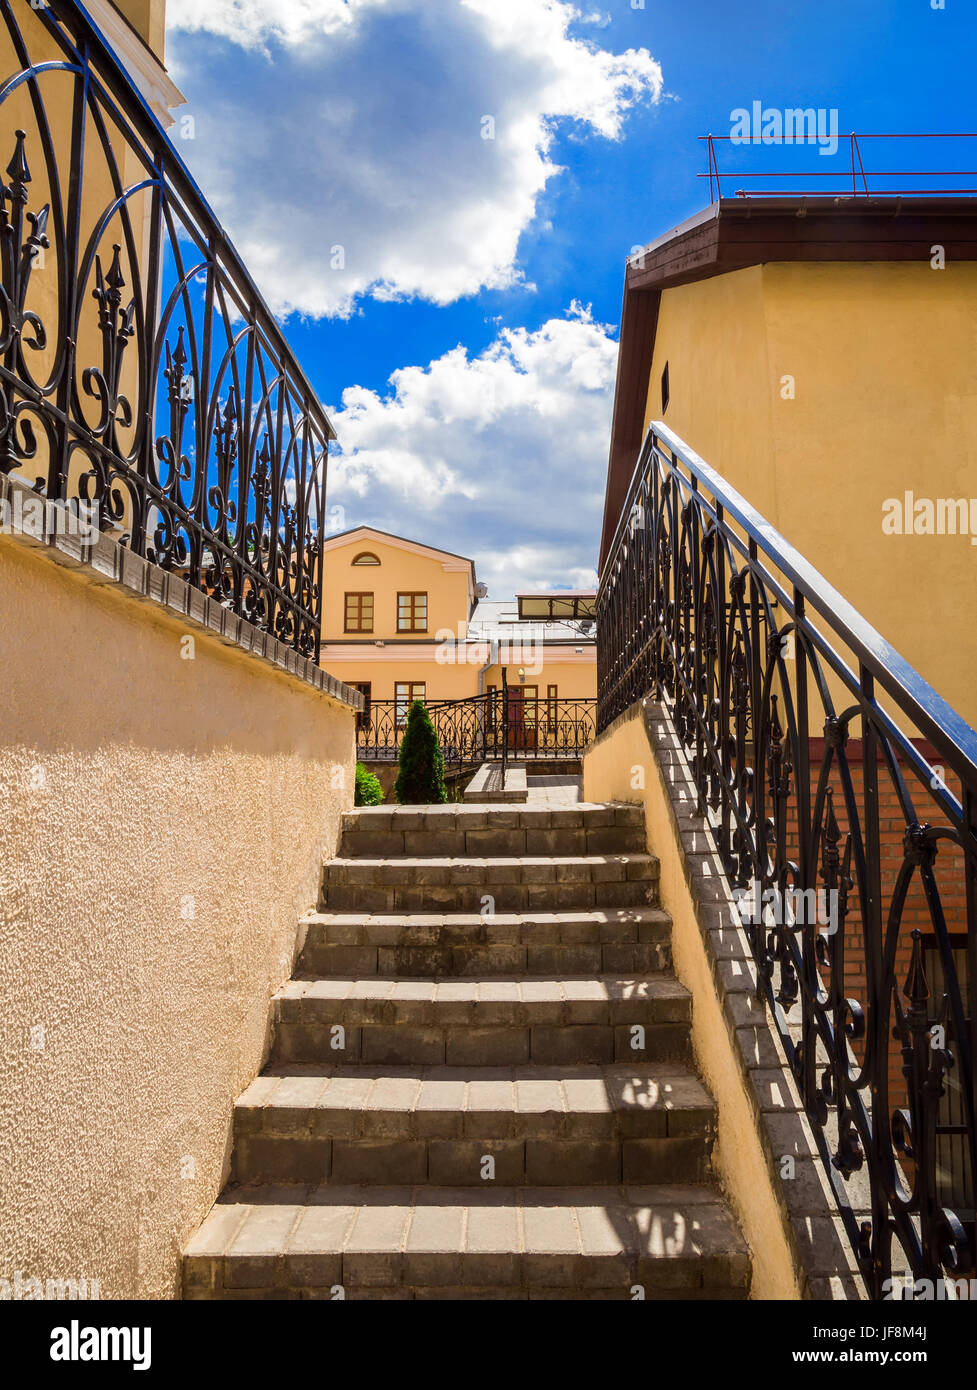 old staircase, architecture Stock Photo